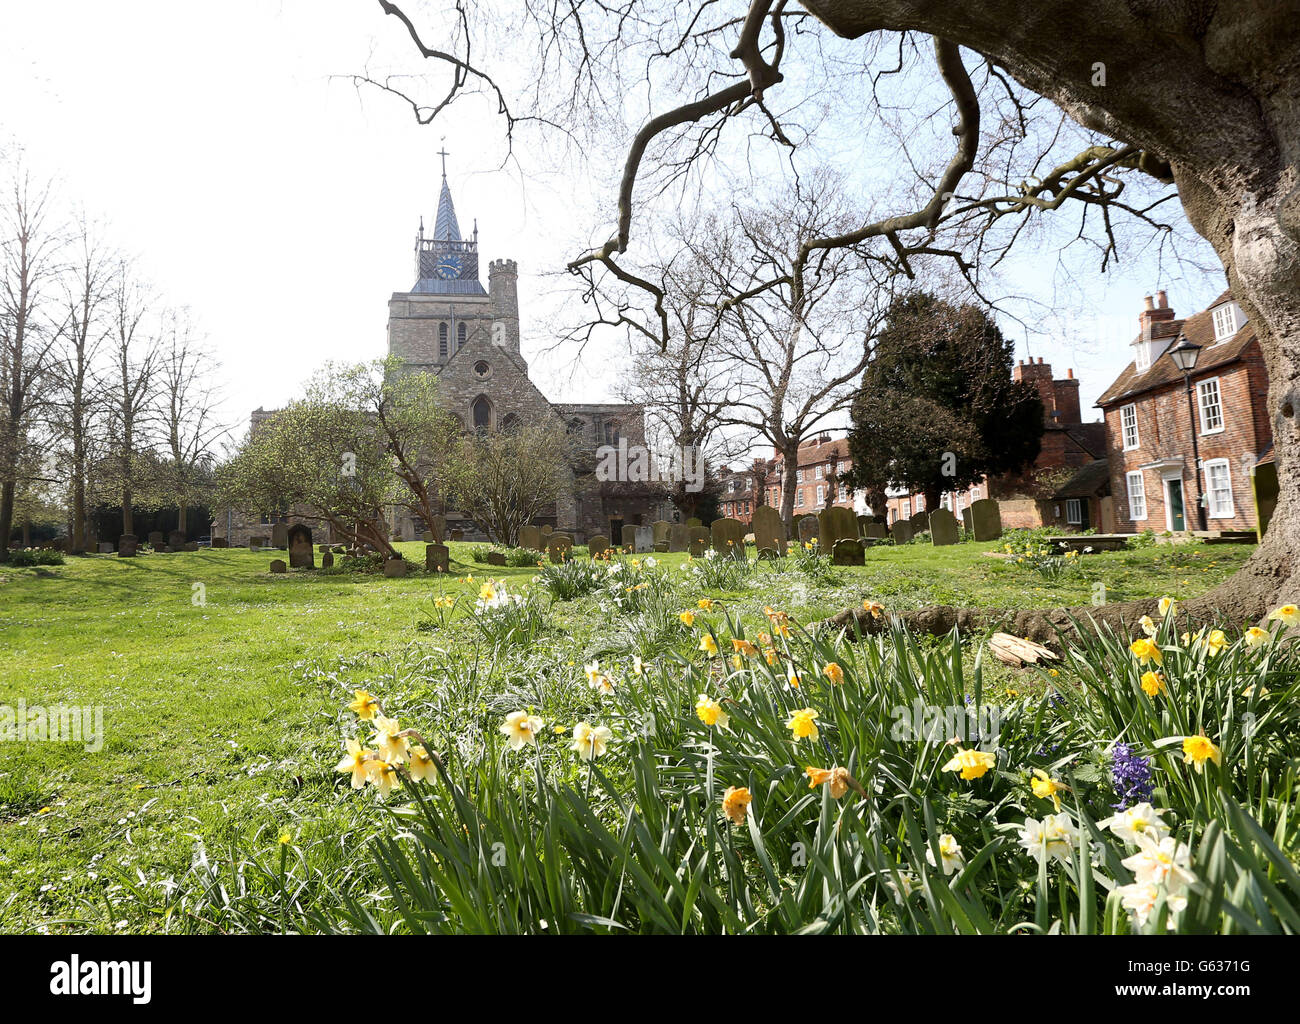 St Mary the Virgin church in Aylesbury, Buckinghamshire, where a man found a human ear was found yesterday while walking his dog in the graveyard. Stock Photo